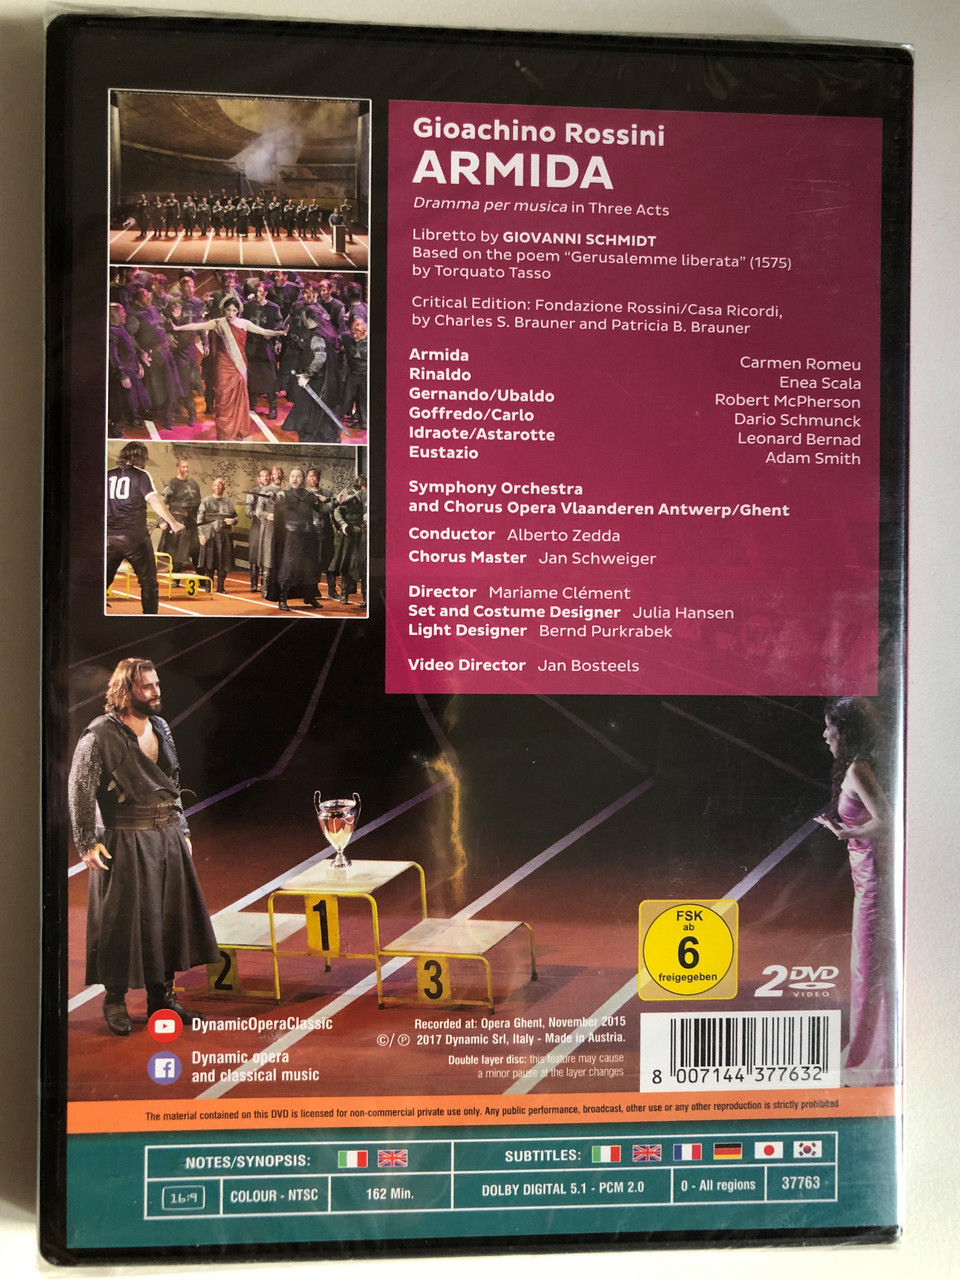 Rossini_Armida_2_DVD_Set_Music_Drama_in_Three_Acts_Libretto_by_GIOVANNI_SCHMIDT_Based_on_the_poem_Jerusalem_Delivered_Symphony_Orchestra_and_Chorus_Opera_Vlaanderen_Antwerp-_3__61495.1691473750.1280.1280.JPG (960×1280)